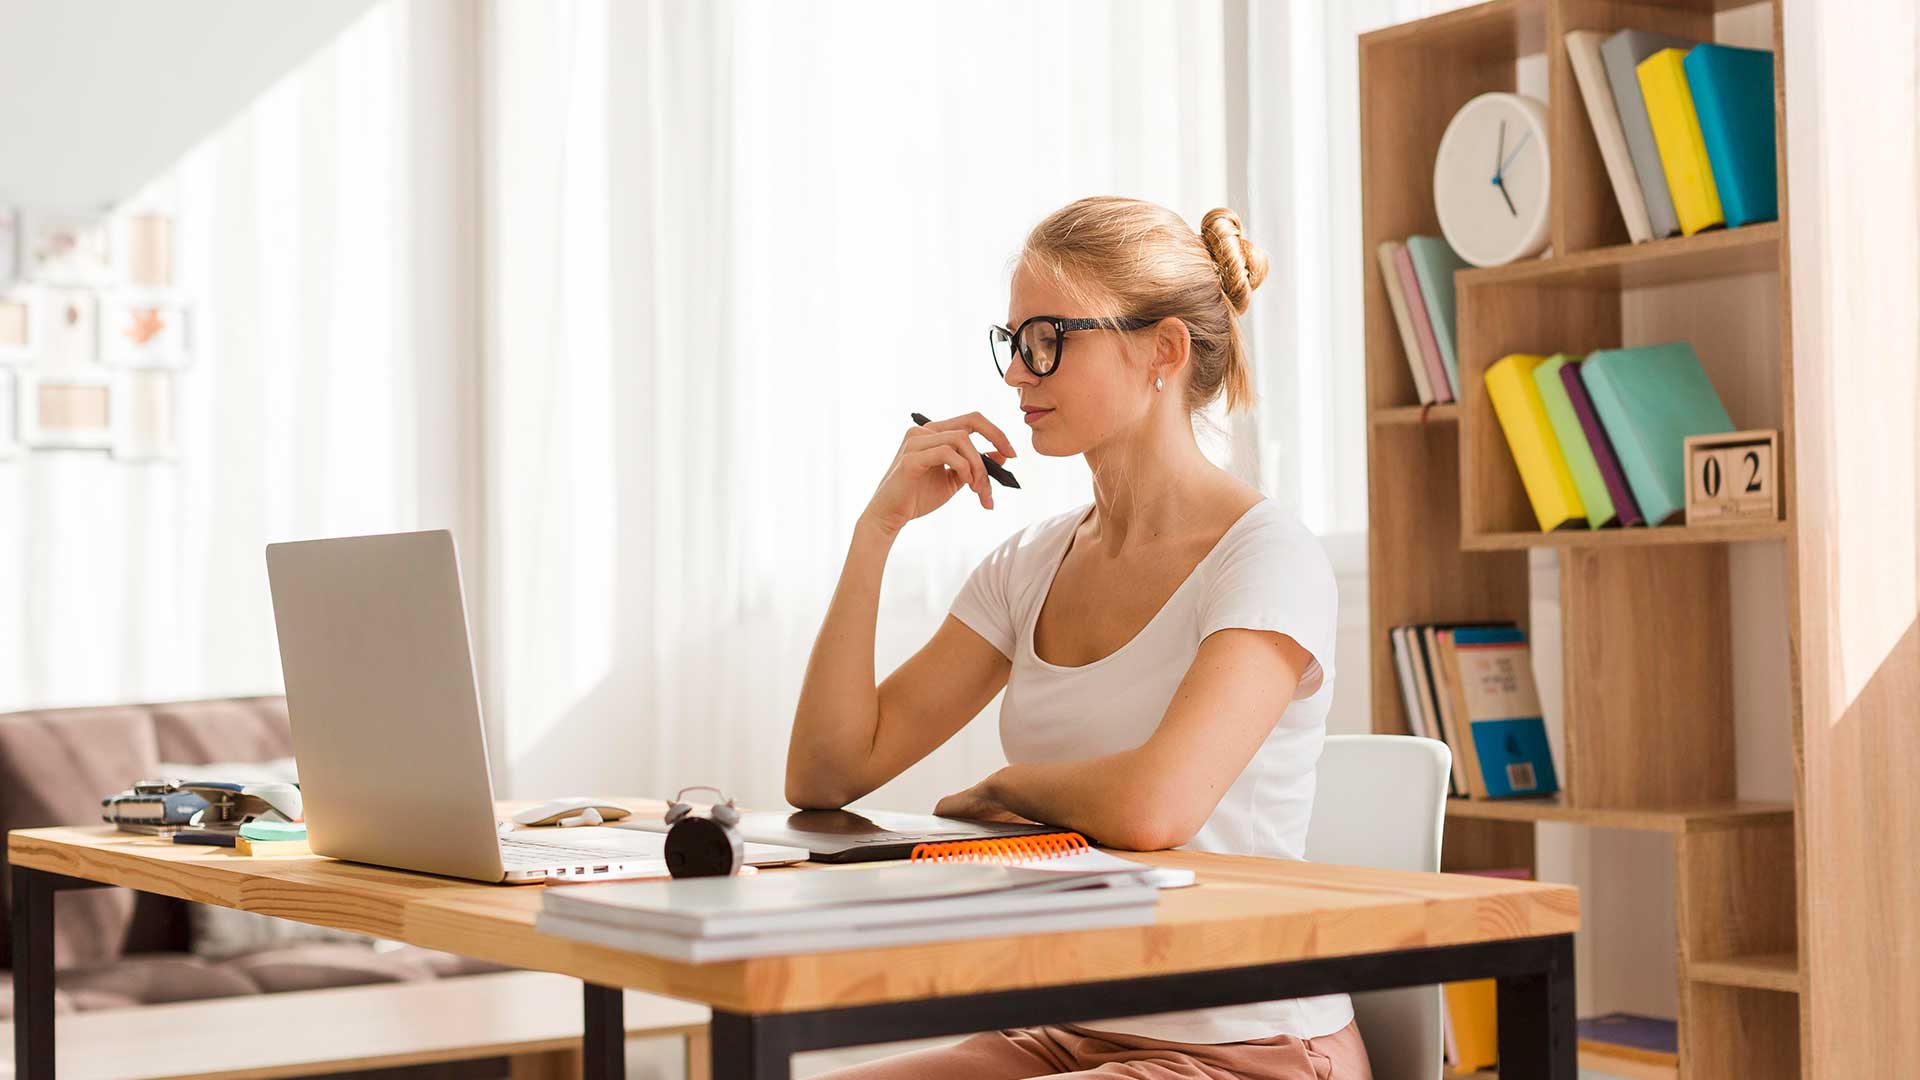 6 Mistakes to Avoid While Working From Home